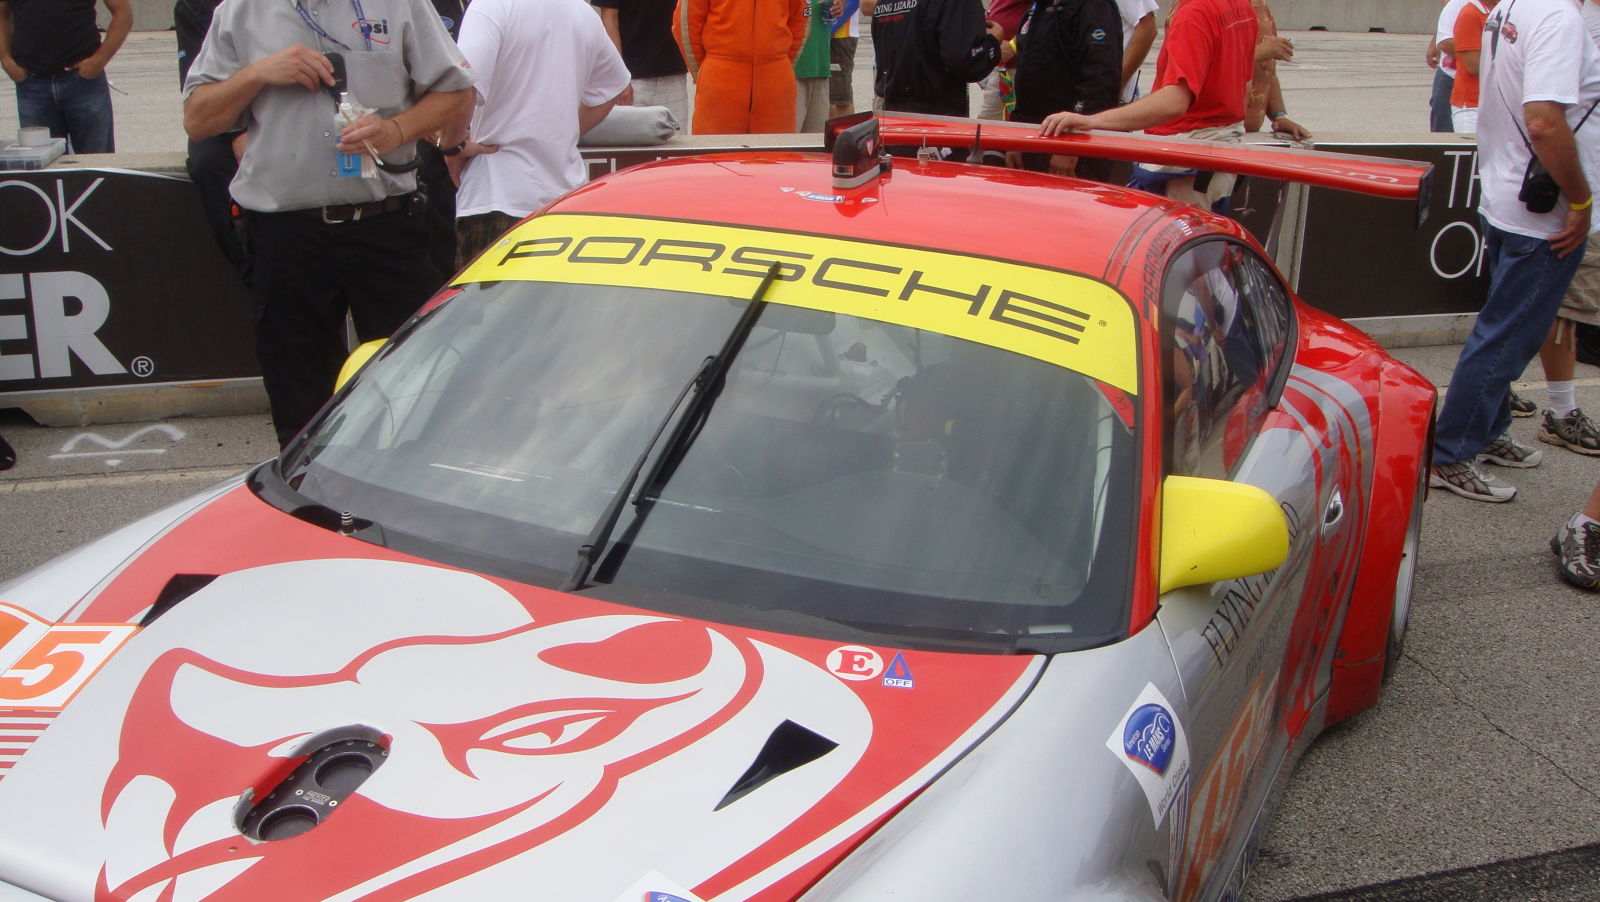 Back when ALMS was where it’s at. I couldn’t get a good shot bc of the crowd, but... Flying Lizard!